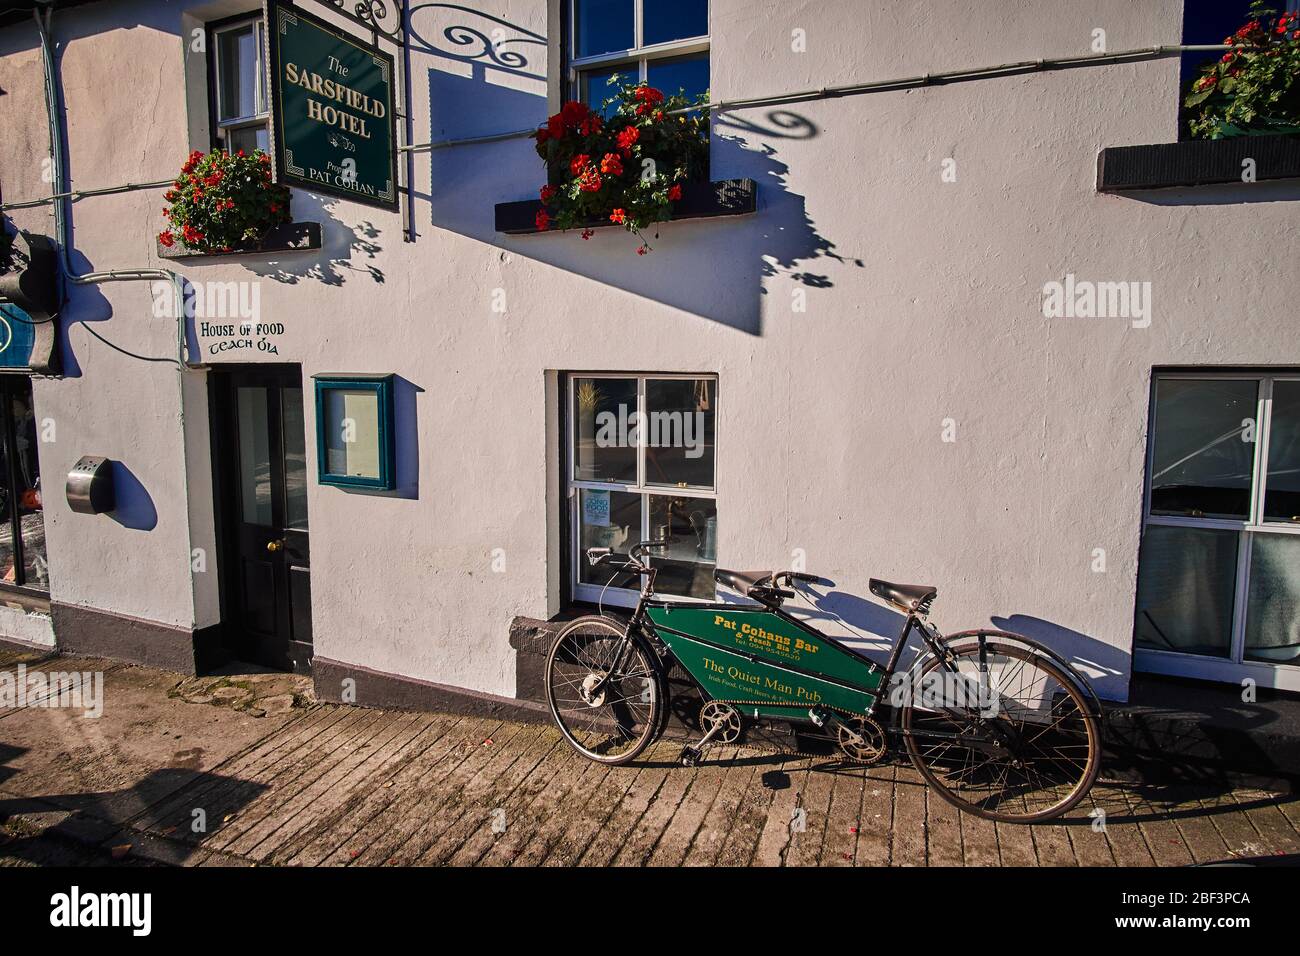 Bicycle in front of Pat Cohan's bar as featured in the Quiet Man film starring John Wayne Stock Photo